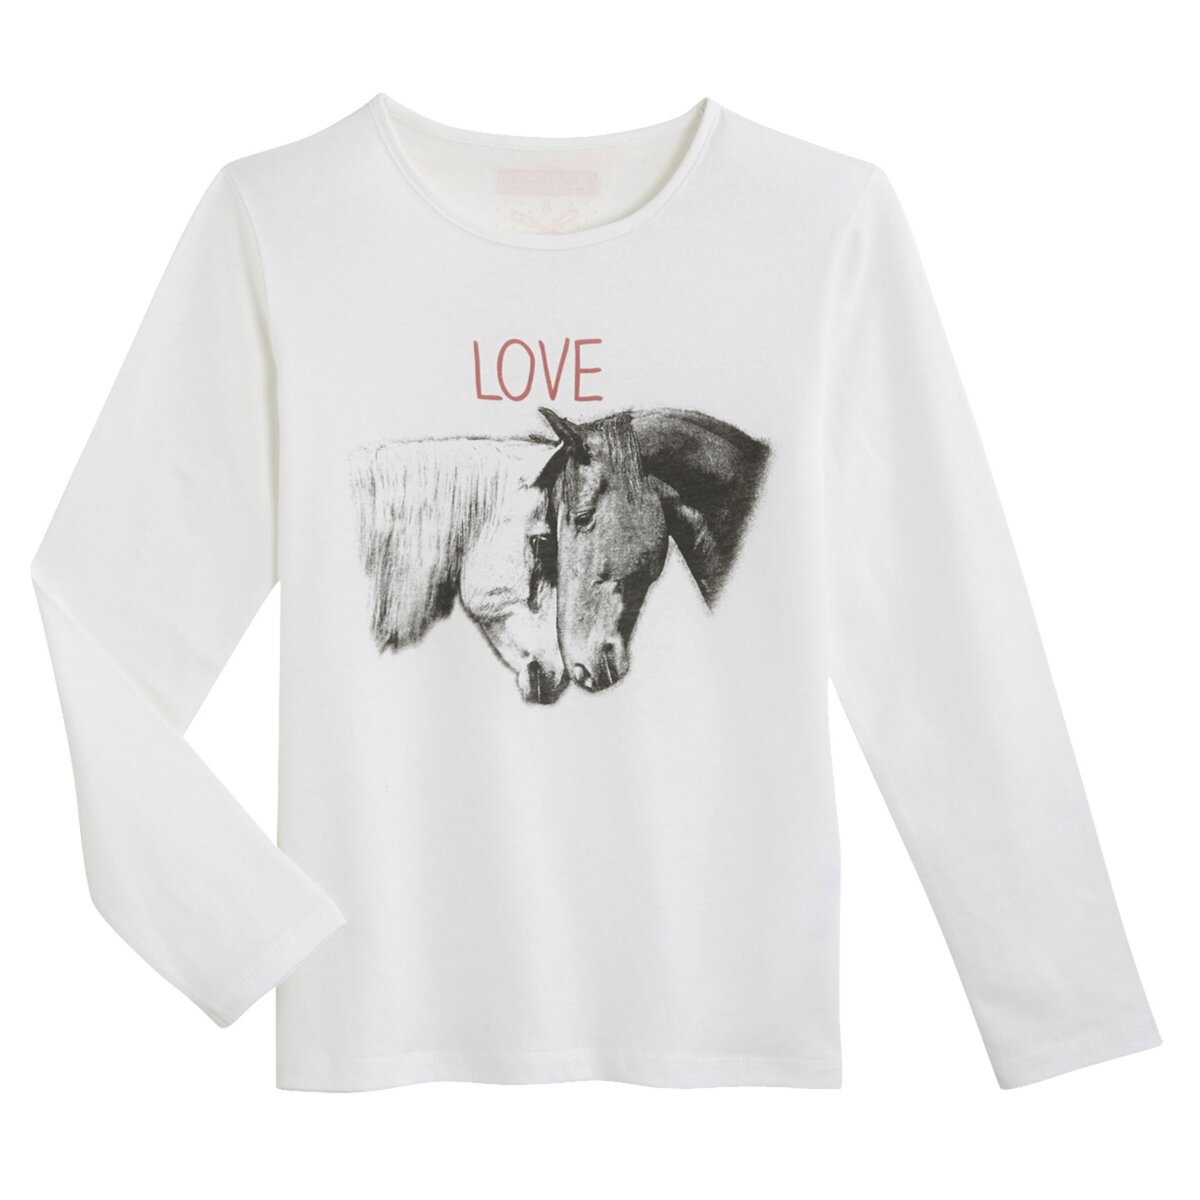 IN EXTENSO Tee-shirt manches longues imprimé chevaux fille